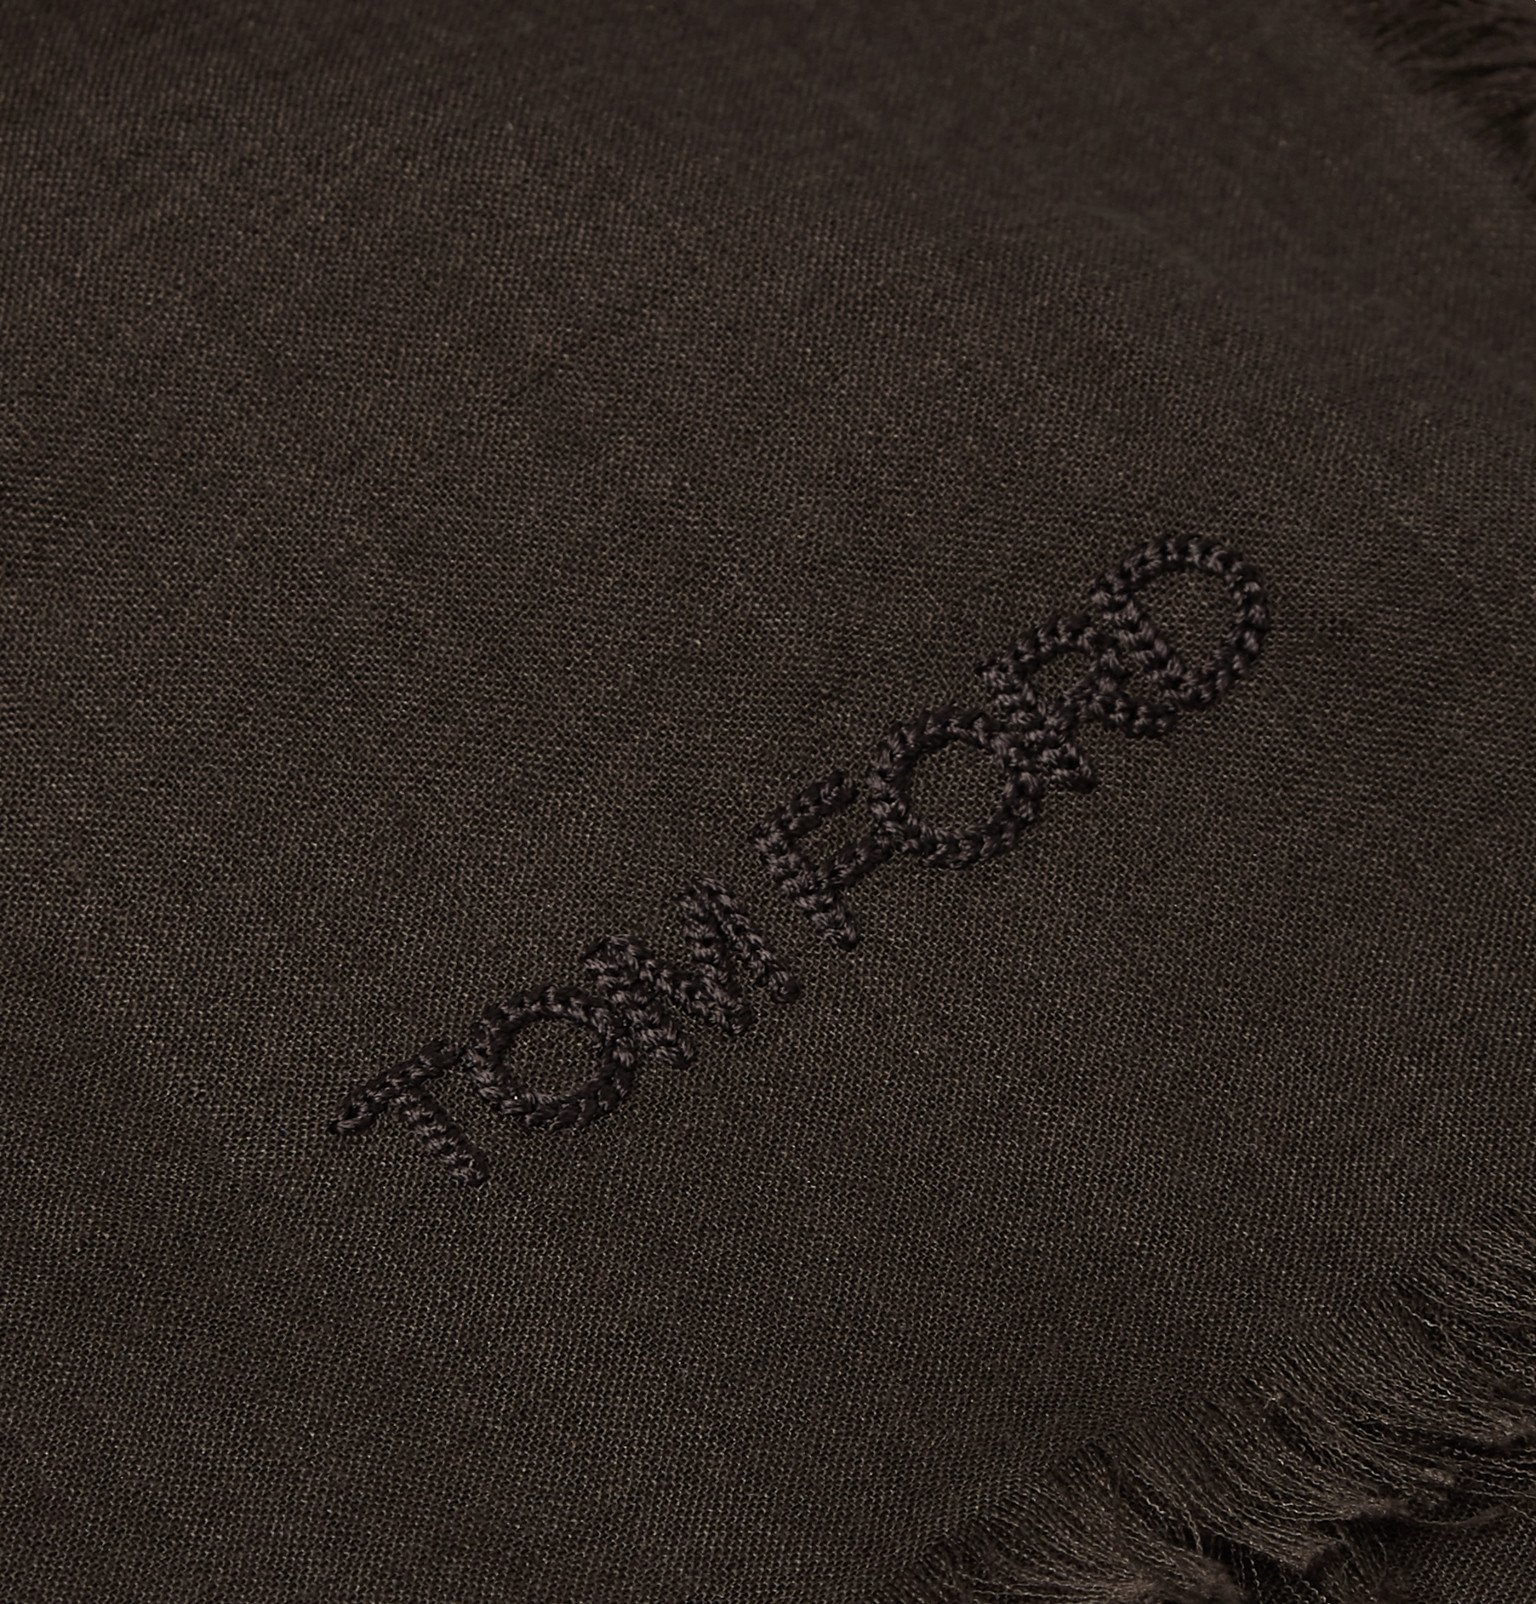 TOM FORD - Logo-Embroidered Wool and Silk-Blend Scarf - Brown TOM FORD